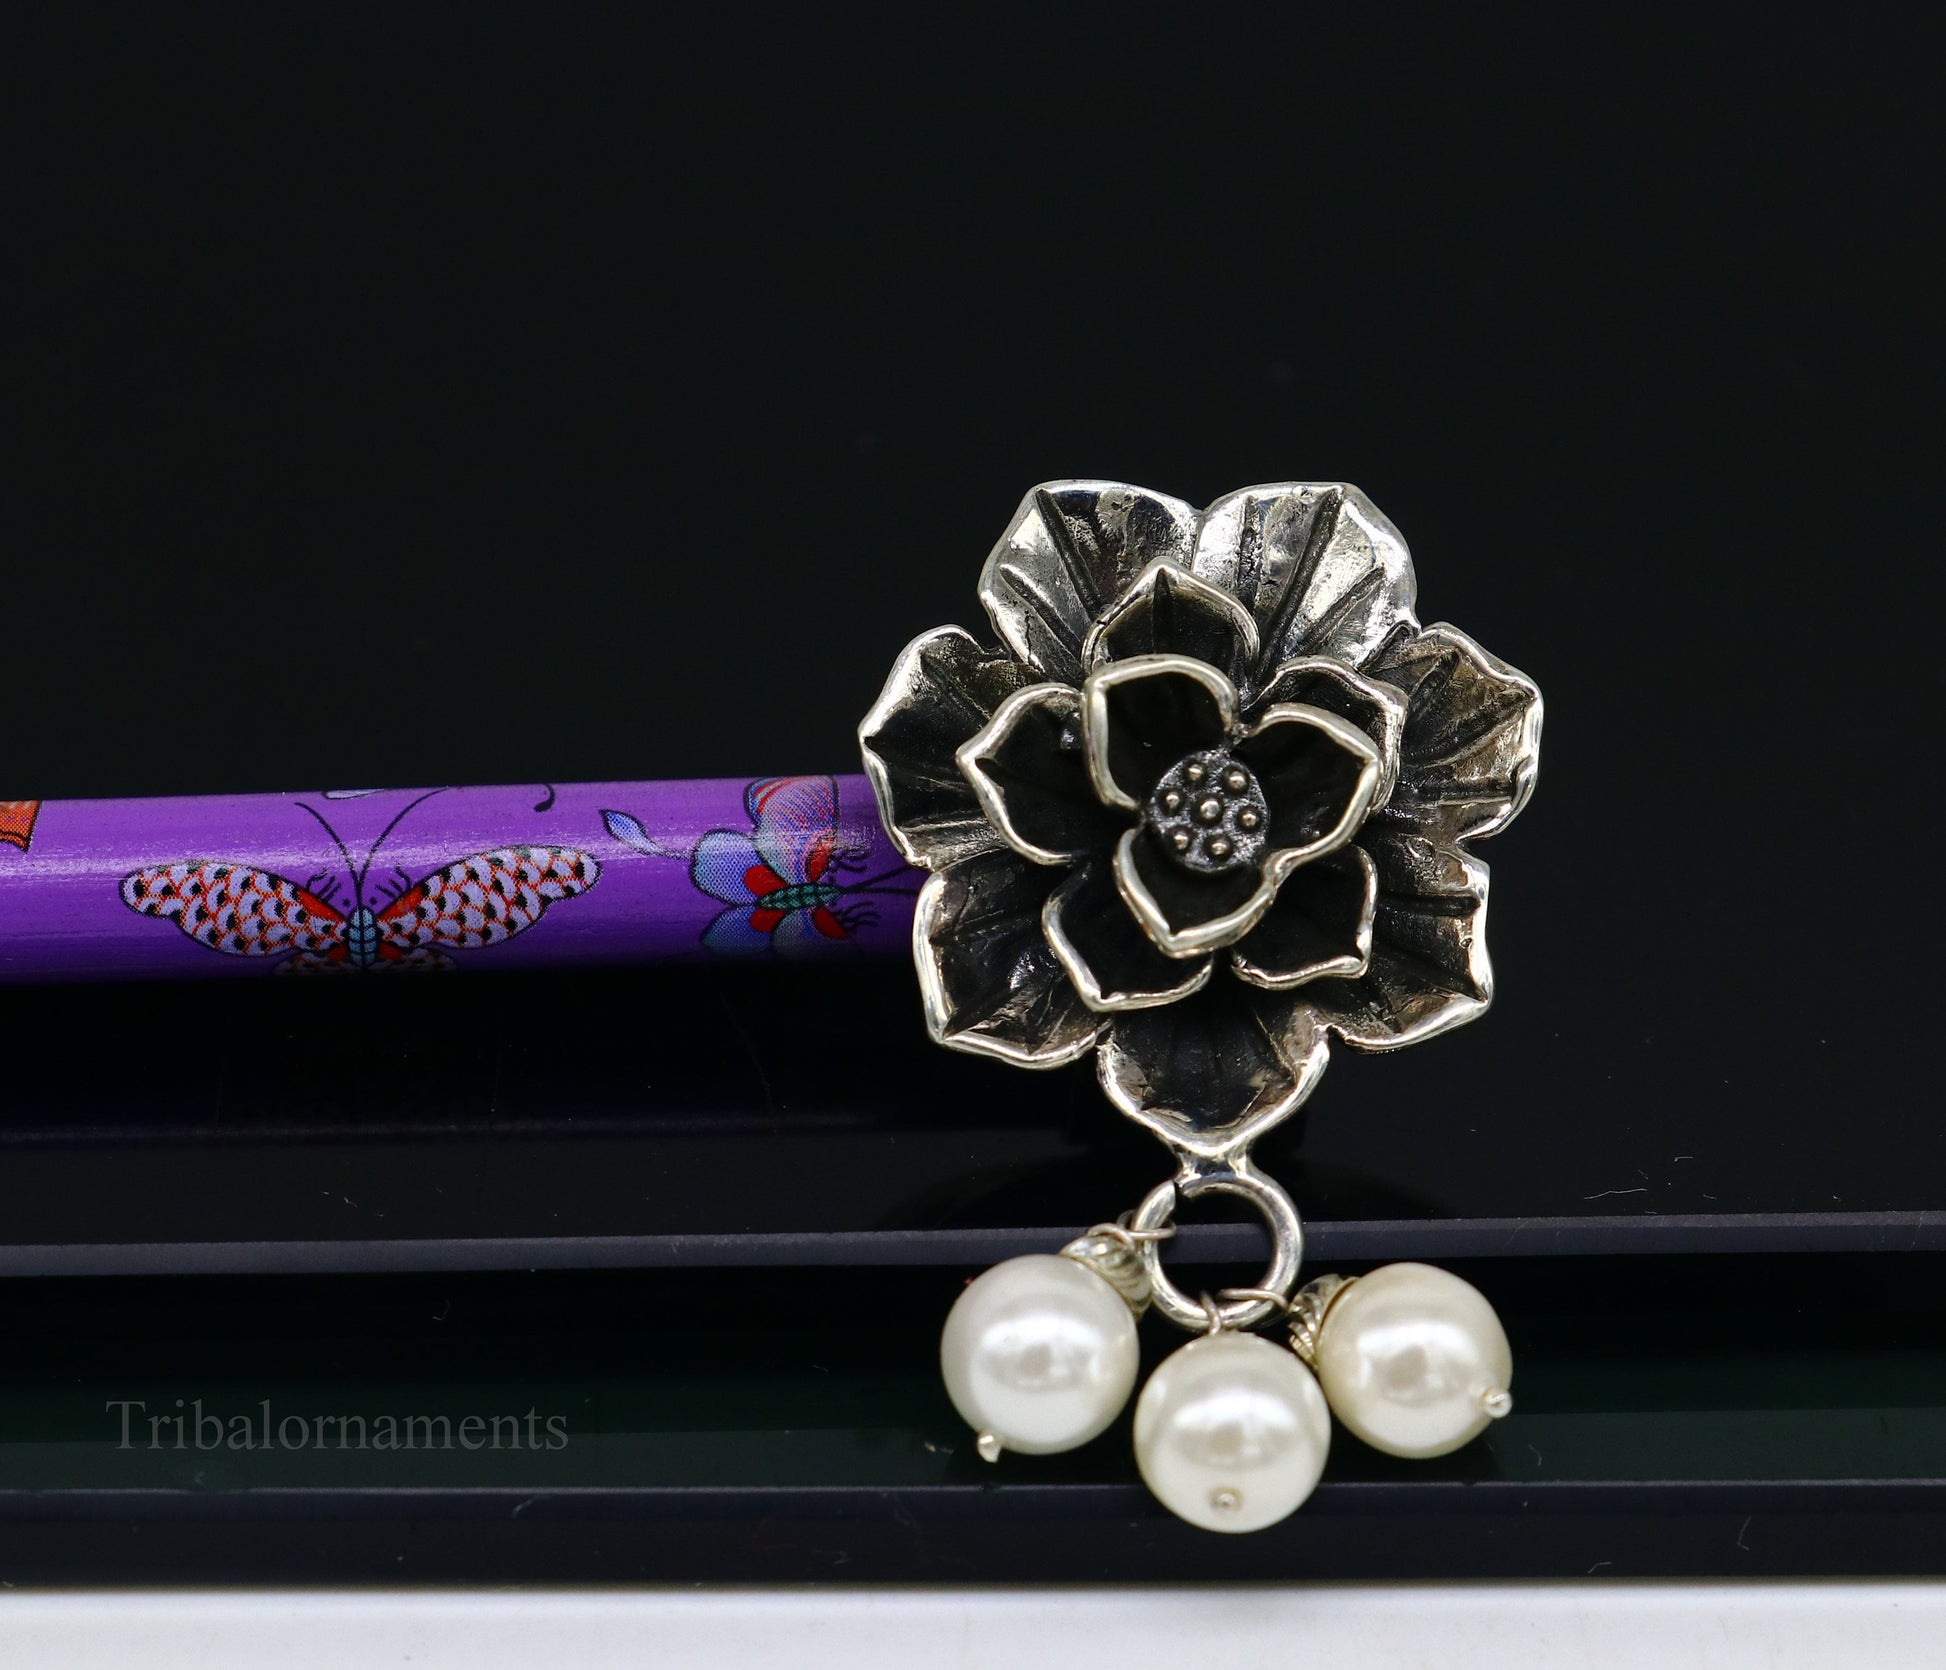 925 sterling silver customized rose flower design hair pin with wooden painted stick amazing hair jewelry brides gifting  hc10 - TRIBAL ORNAMENTS